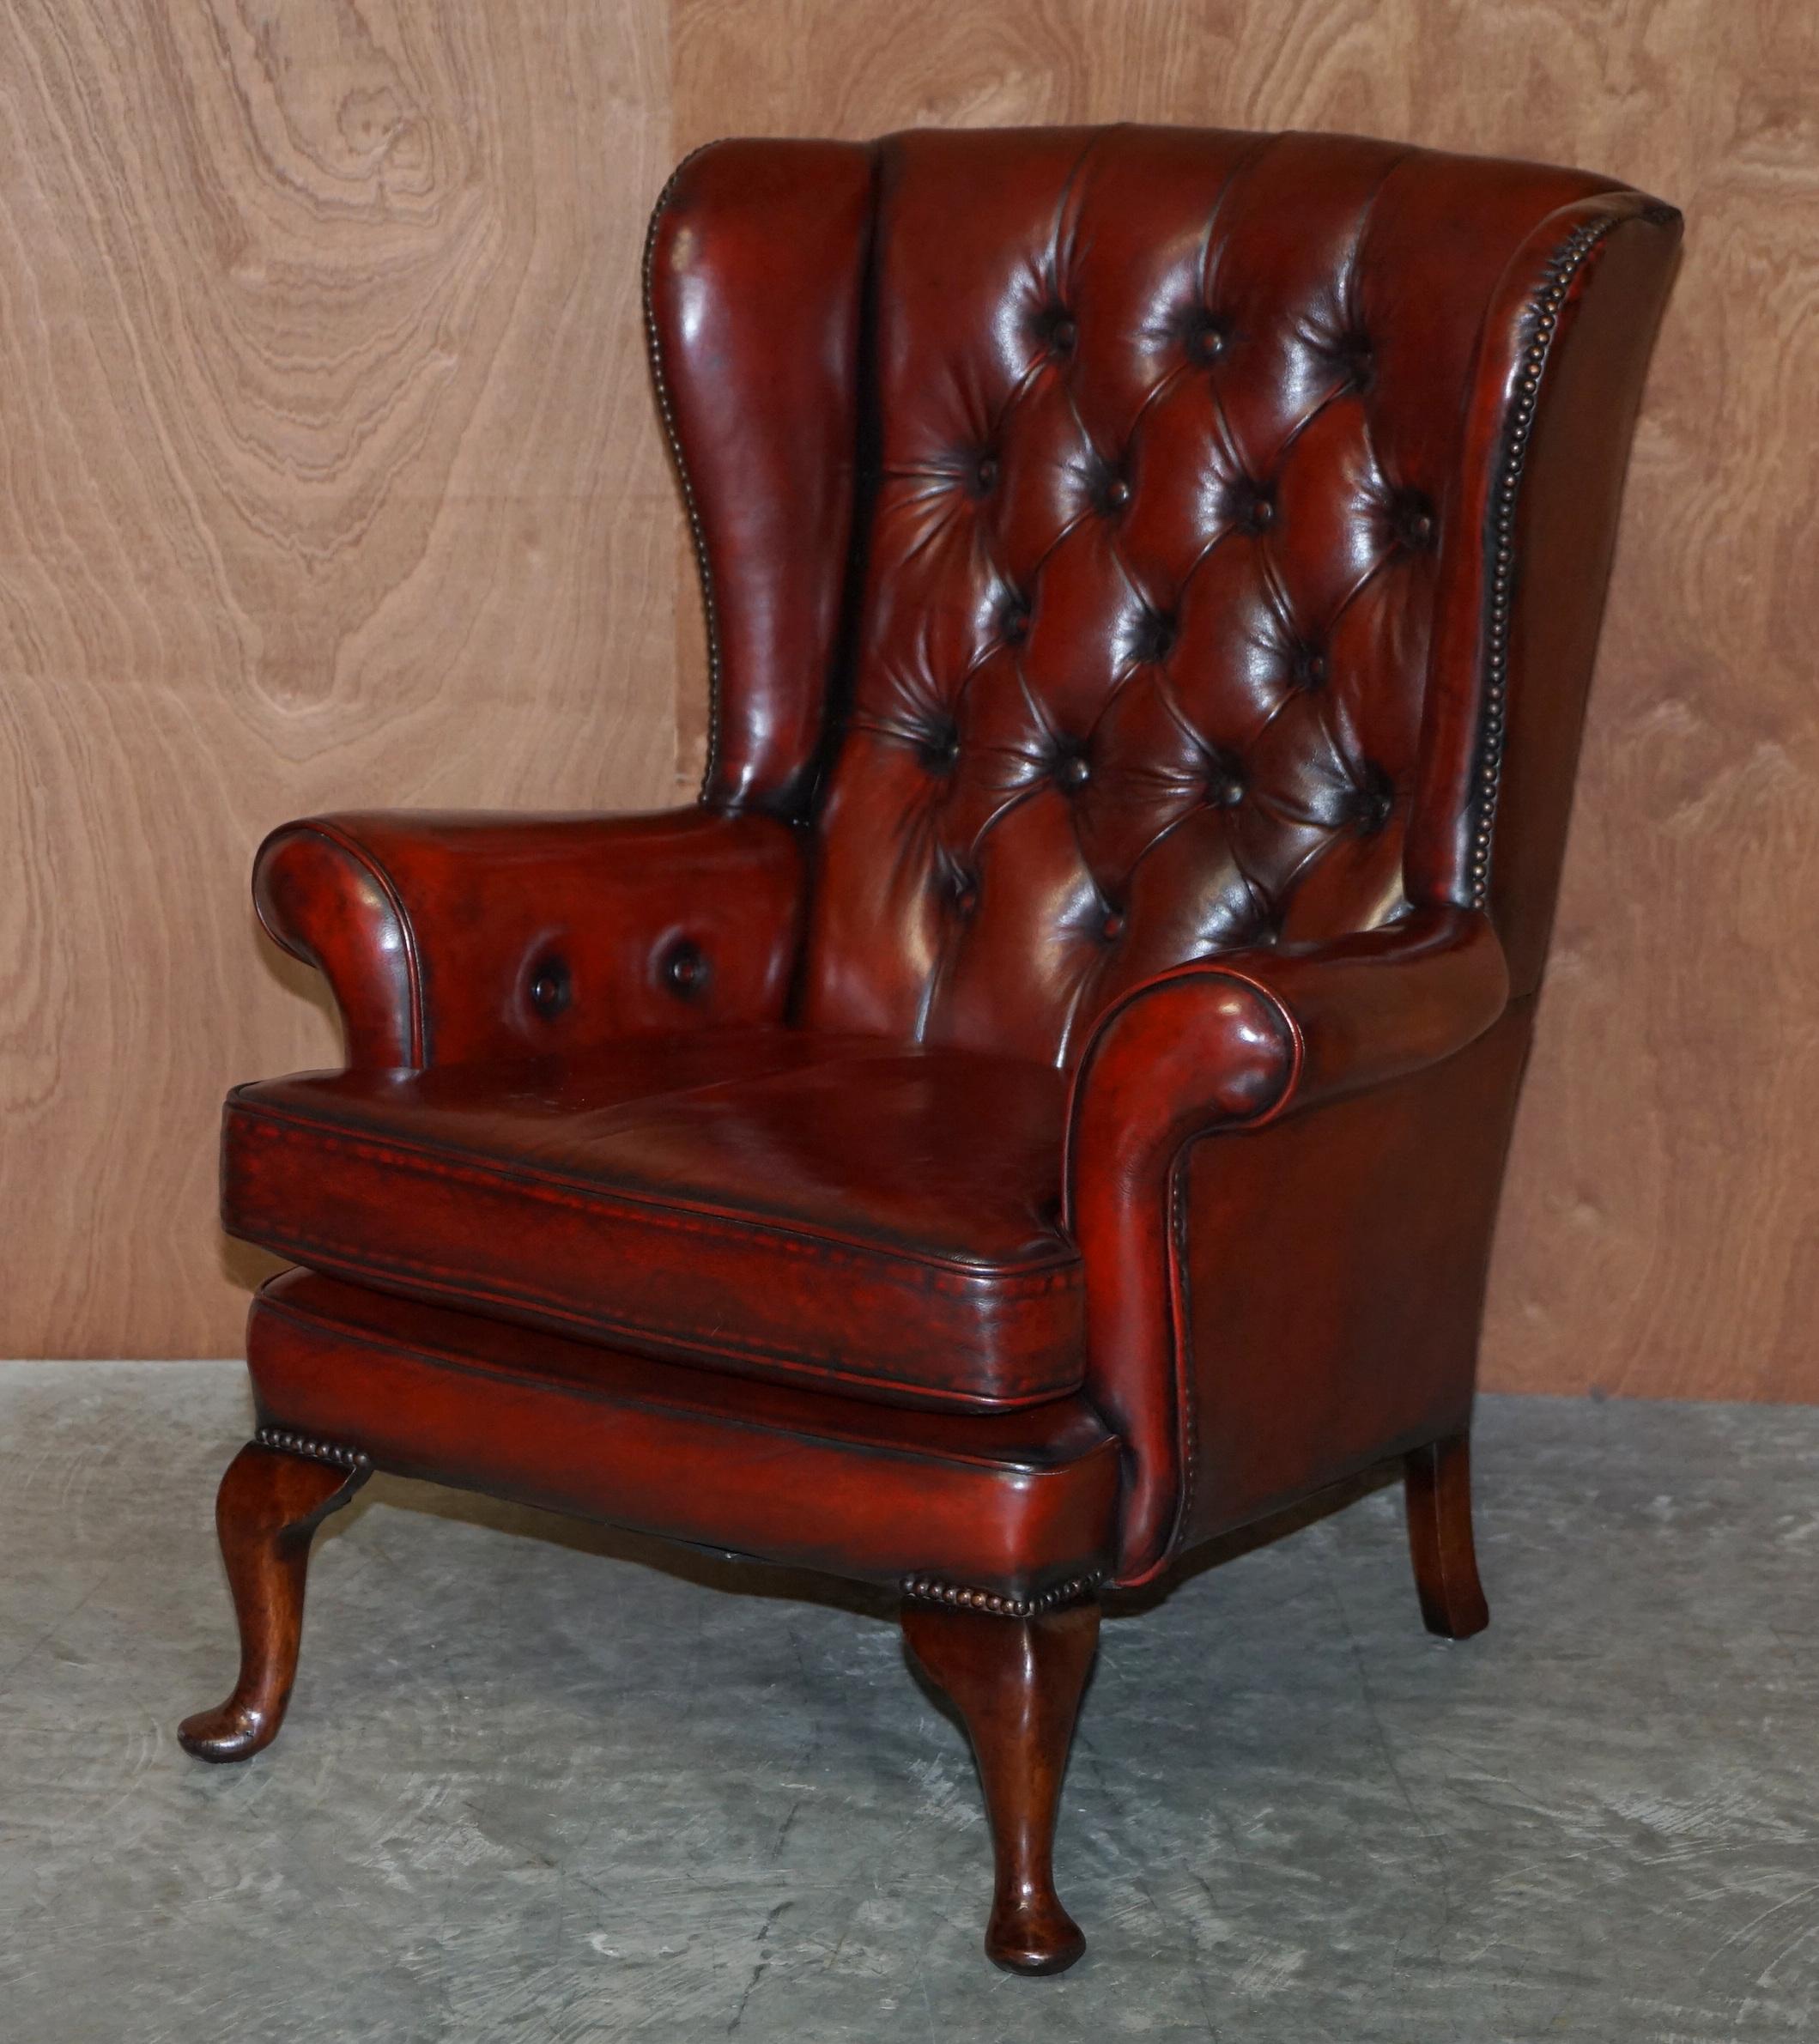 We are delighted to offer this stunning pair of Chesterfield Bordeaux leather fully restored vintage wingback armchairs with matching footstools

Please note the delivery fee listed is just a guide, it covers within the M25 only for the UK and